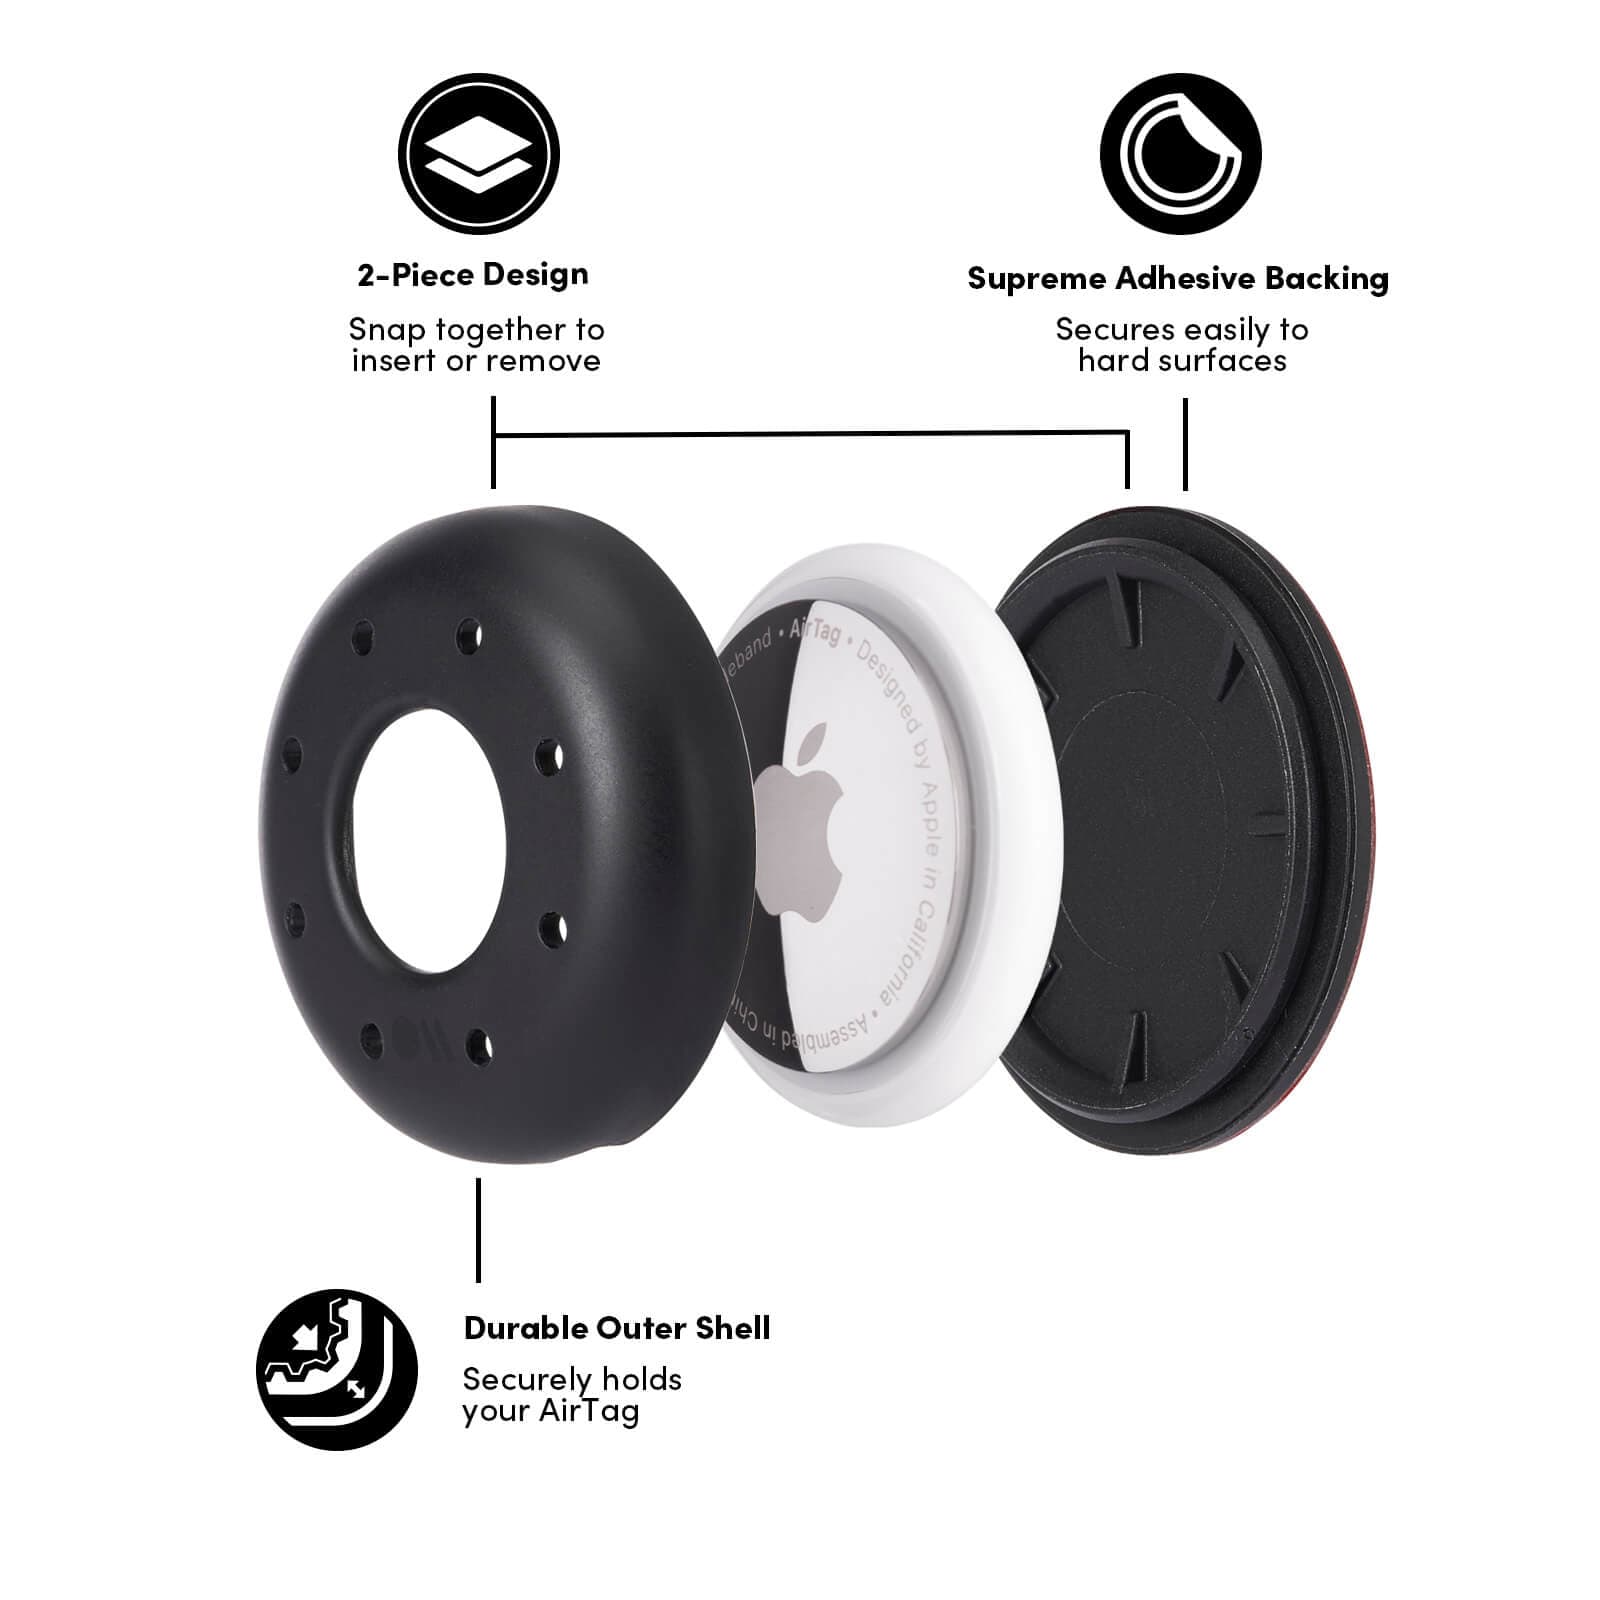 Features: 2 piece design, snap together to insert or remove. supreme adhesive backing, secures easily to hard surfaces. durable outer shell, securely holds your AirTag. color::Black